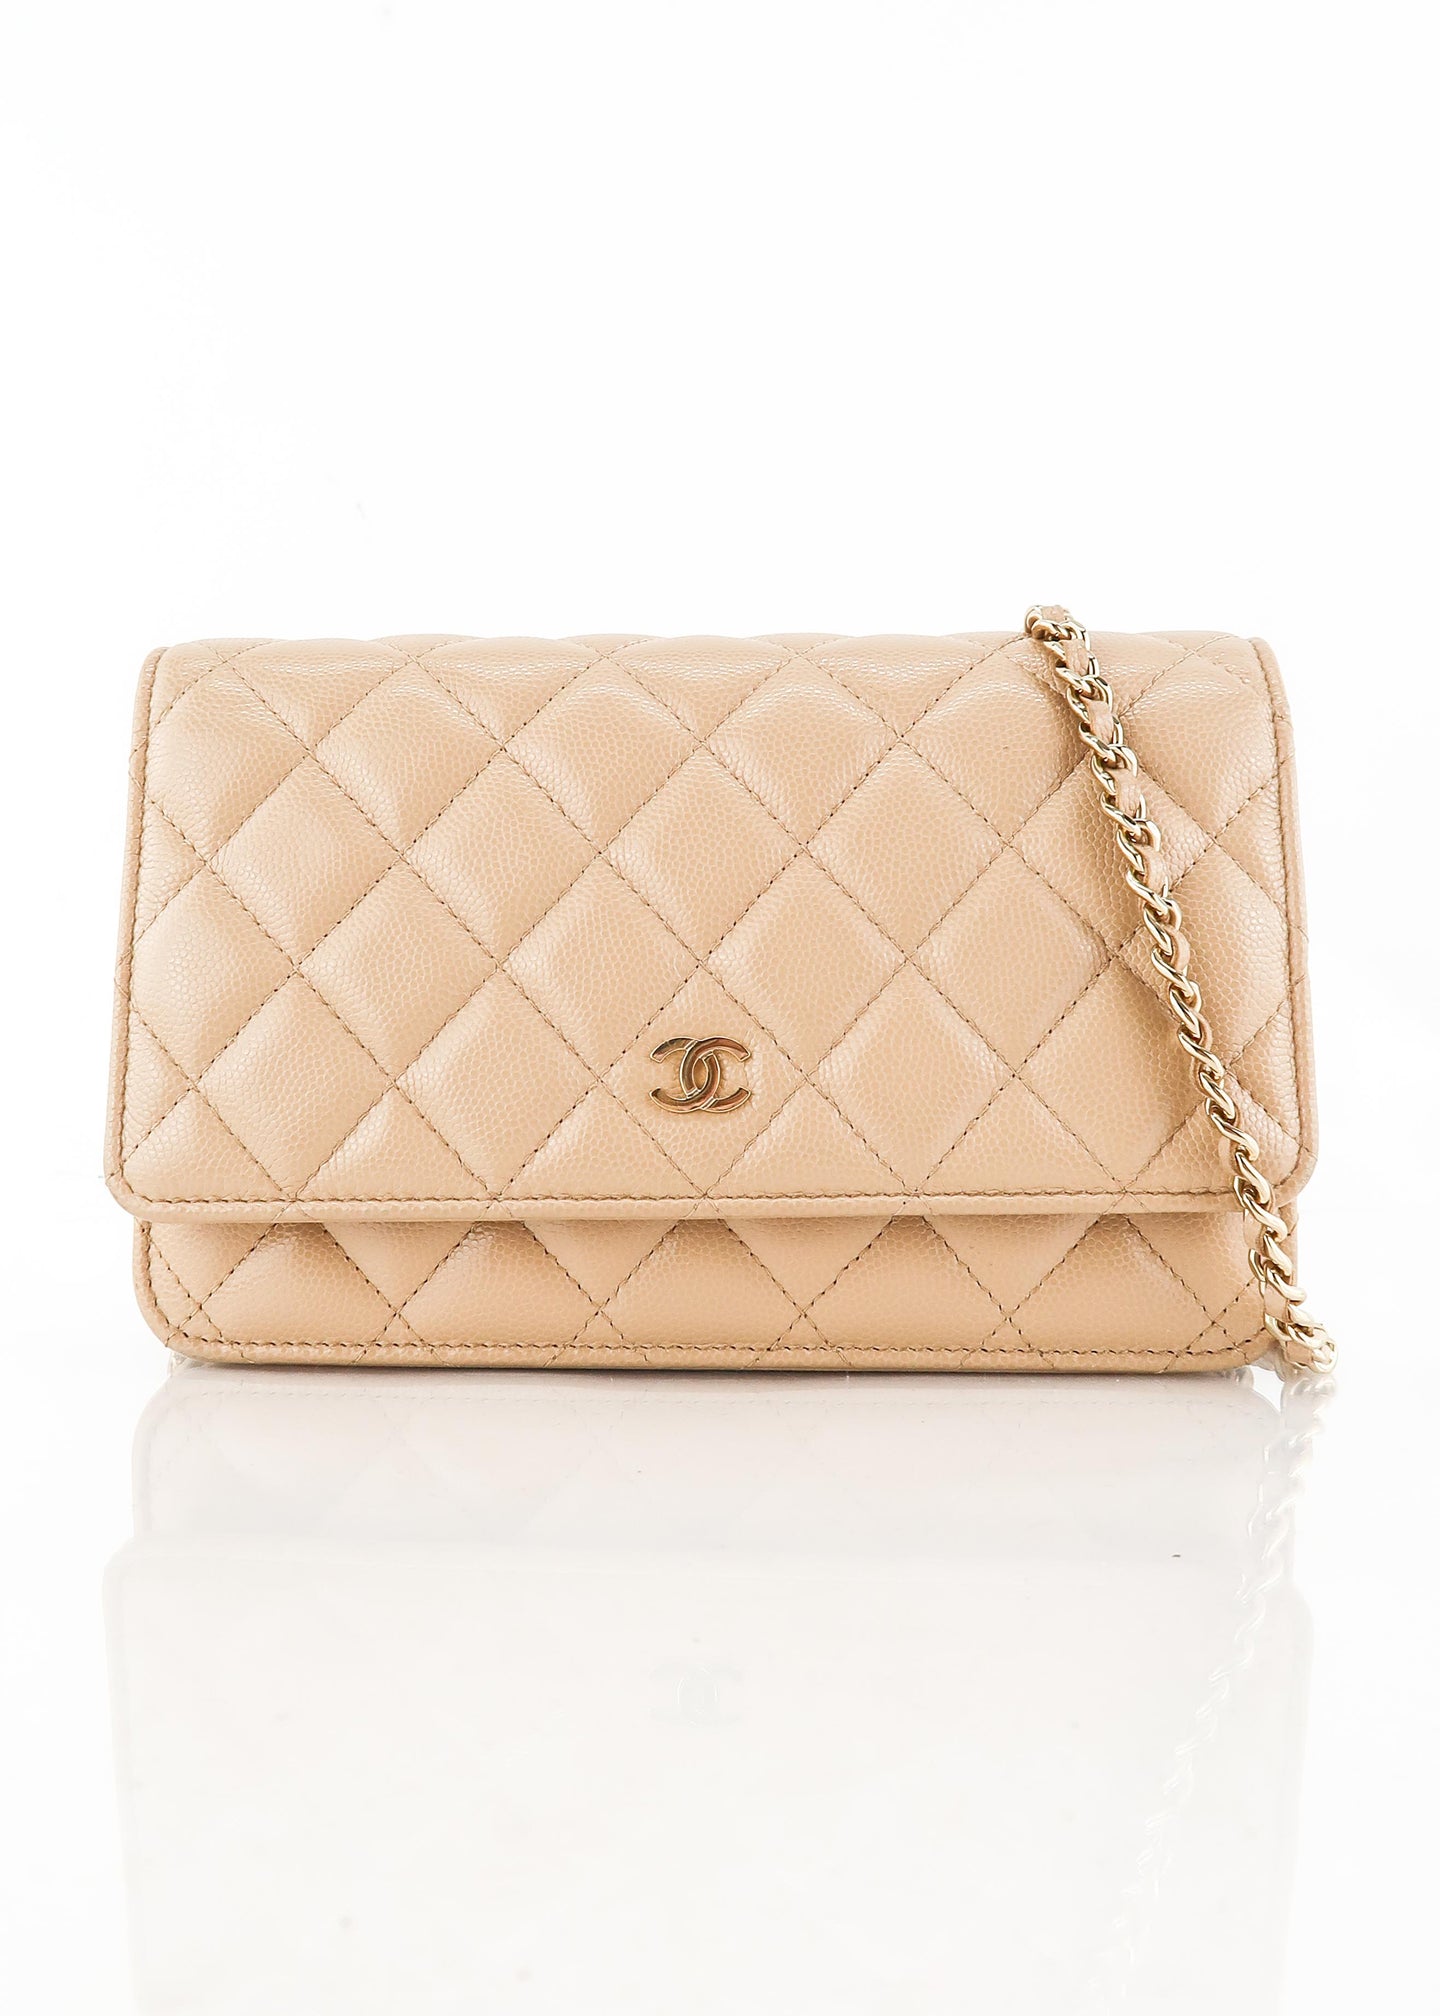 CHANEL Caviar Quilted Wallet On Chain WOC White  FASHIONPHILE  Chanel  chain bag Chanel wallet on chain caviar Chanel wallet